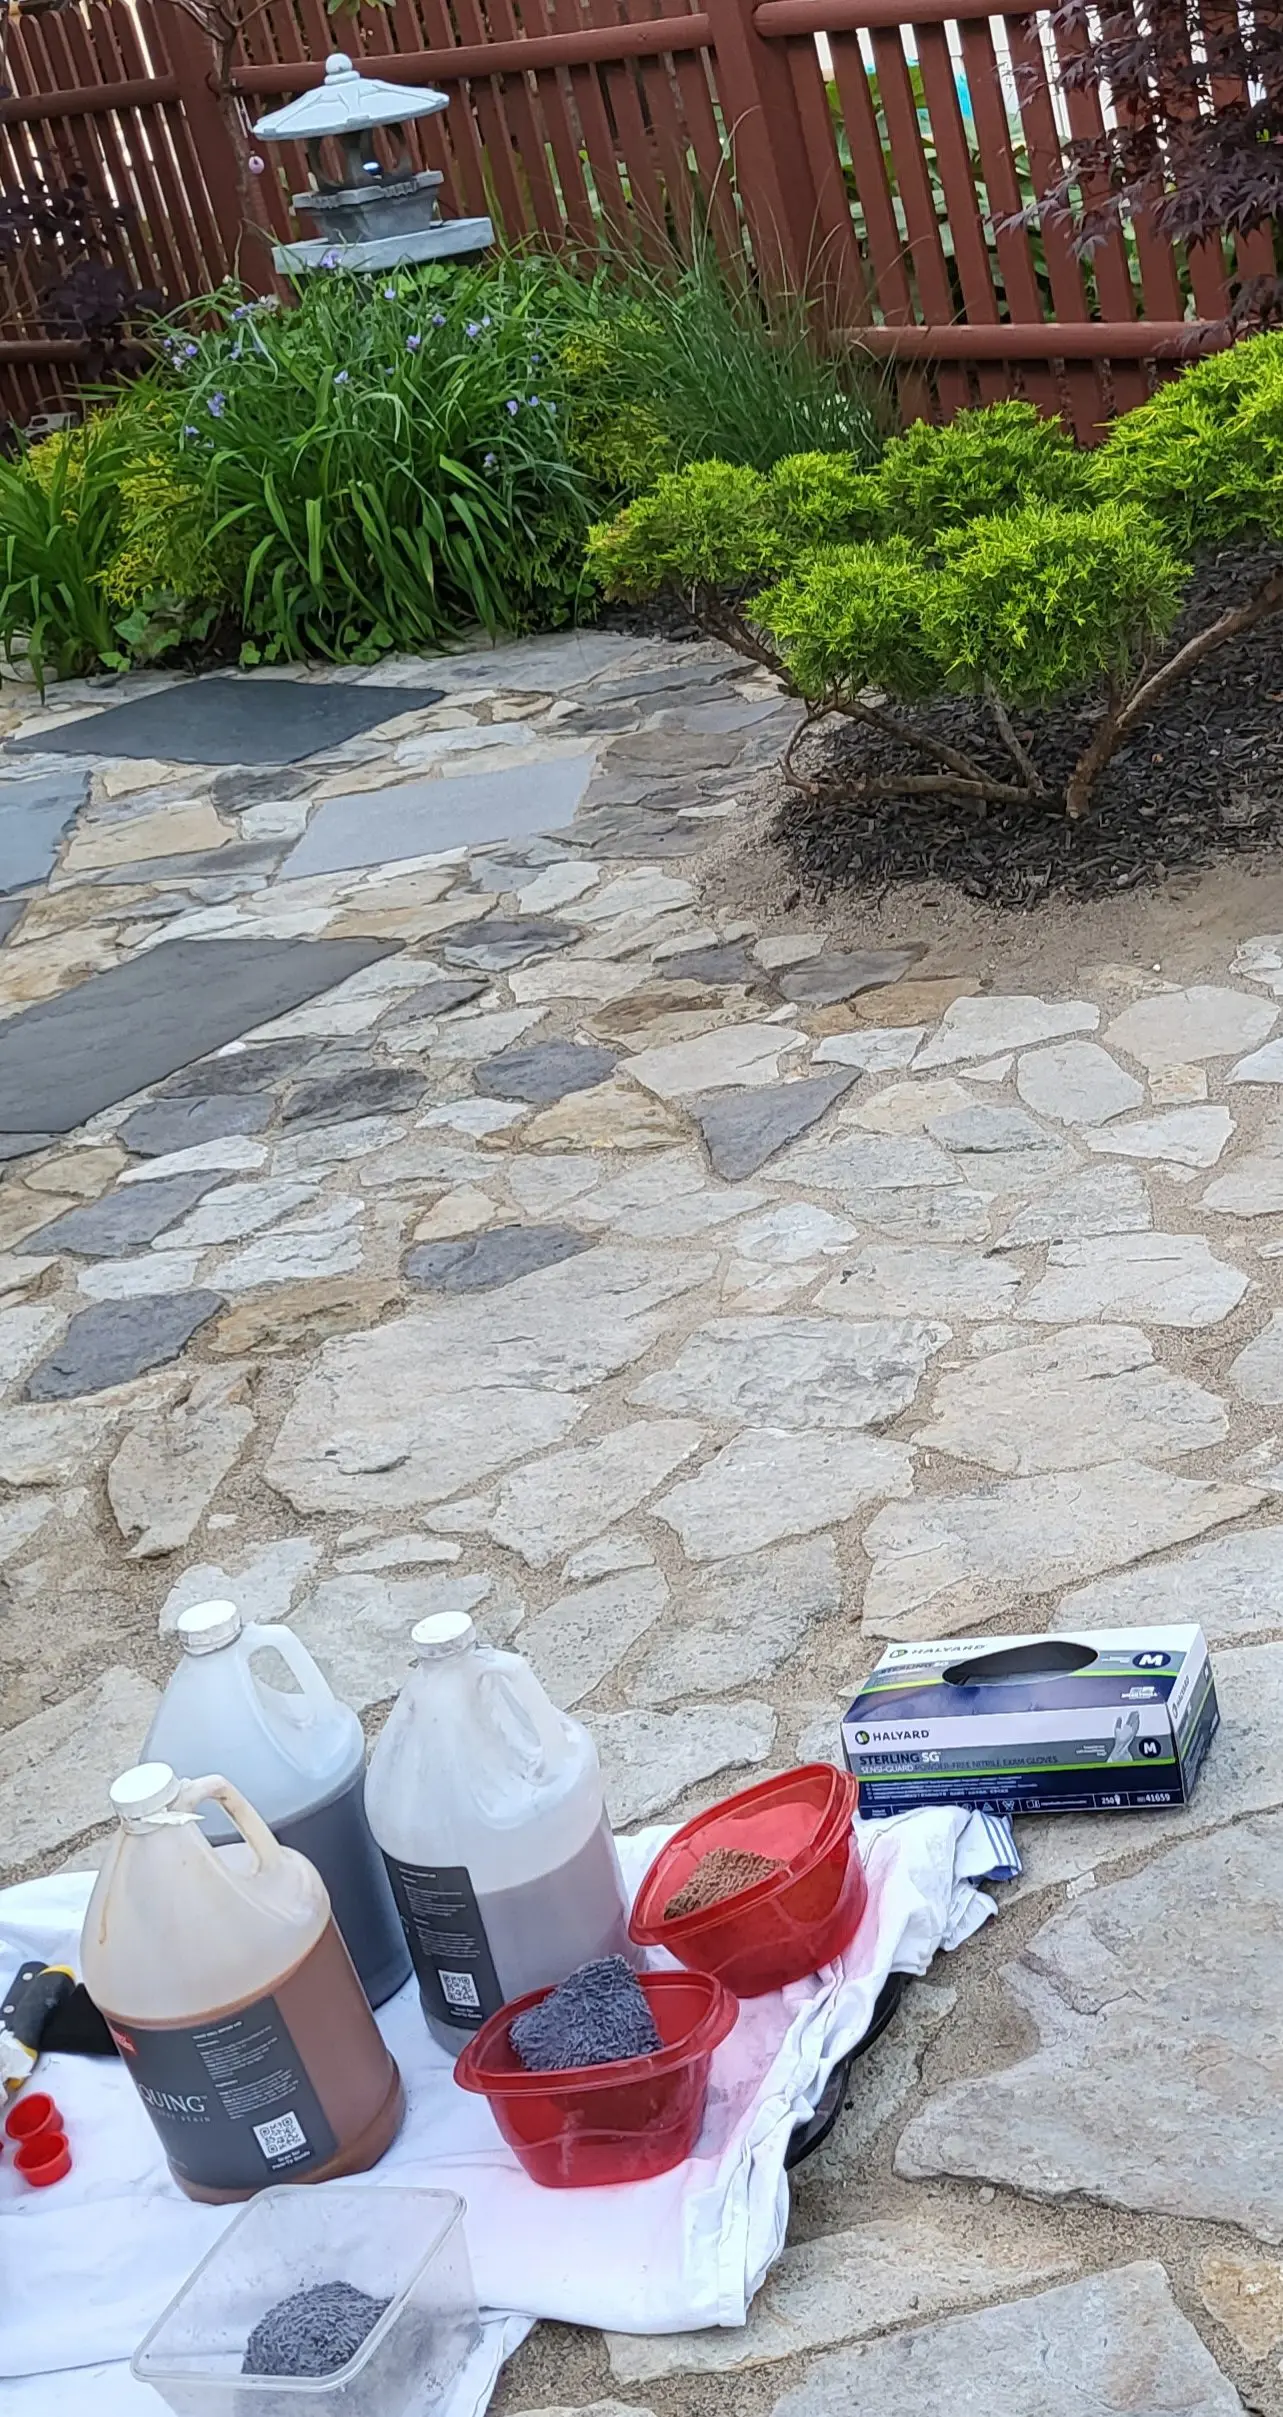 A DIY patio stone design in progress, featuring individual stones being meticulously hand-stained with sponges, using various concrete stain colors to achieve a realistic slate appearance.